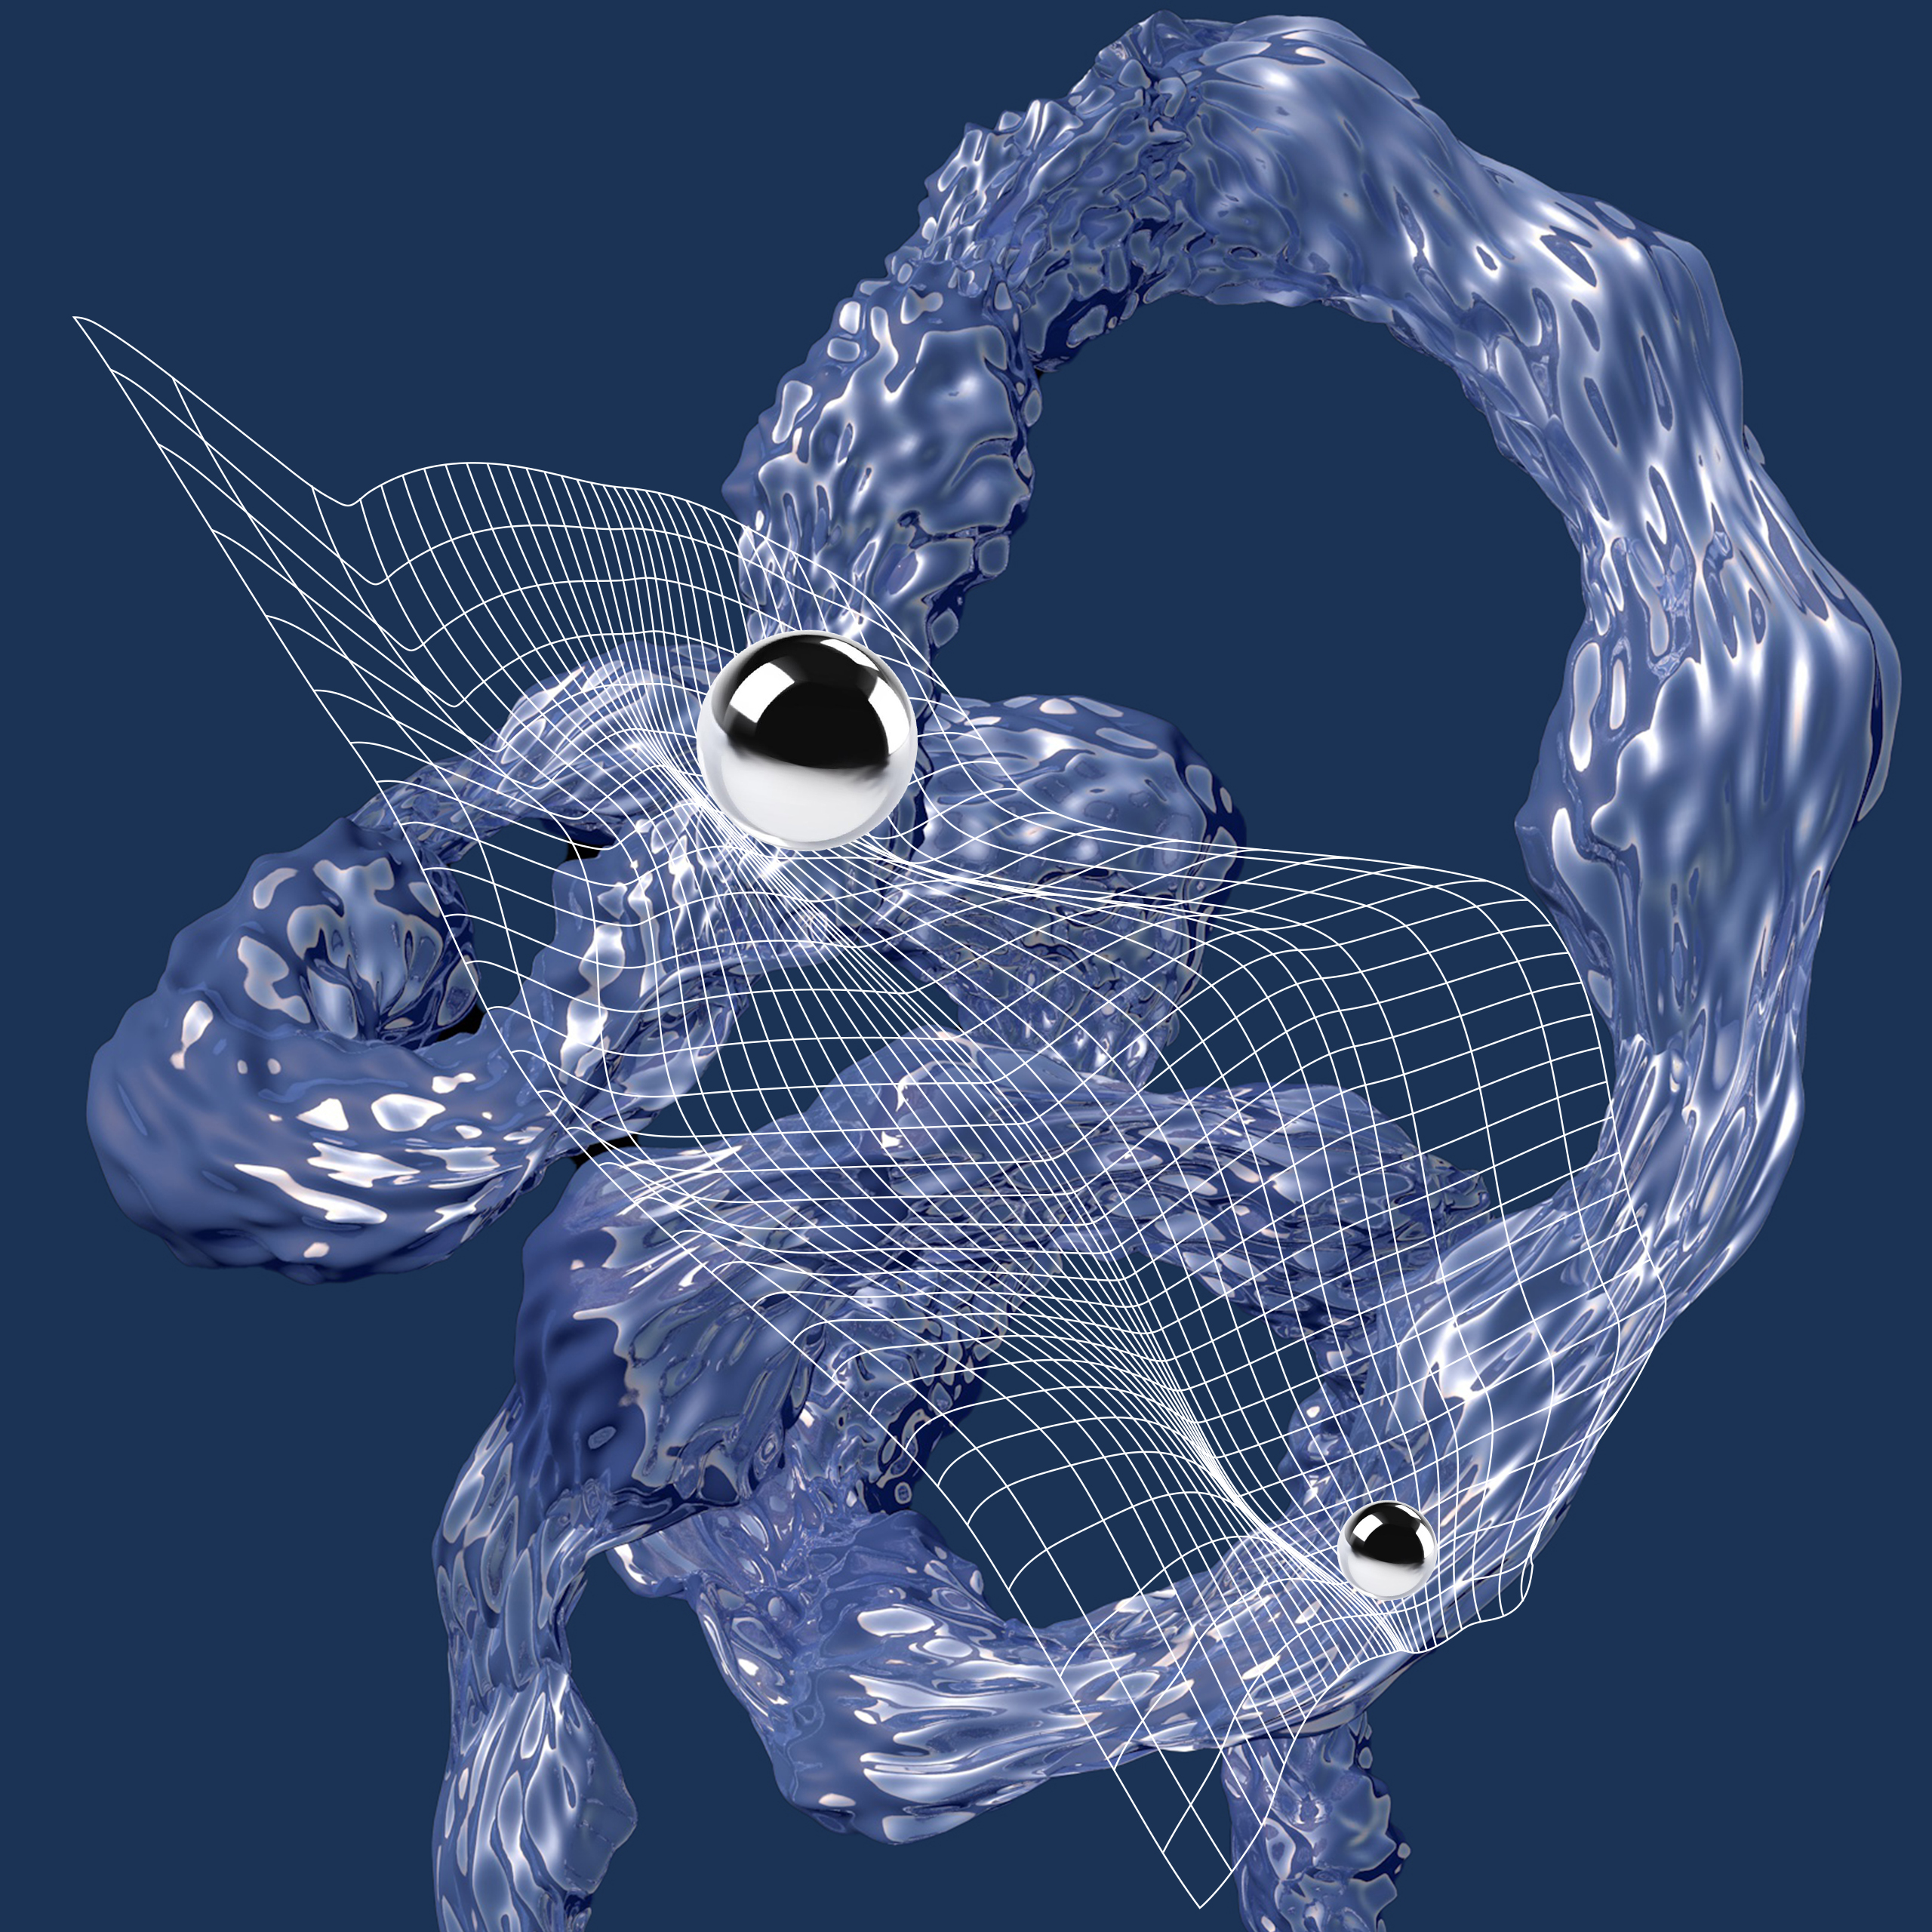 Abstract metaverse design with silver metal balls and blue structures.